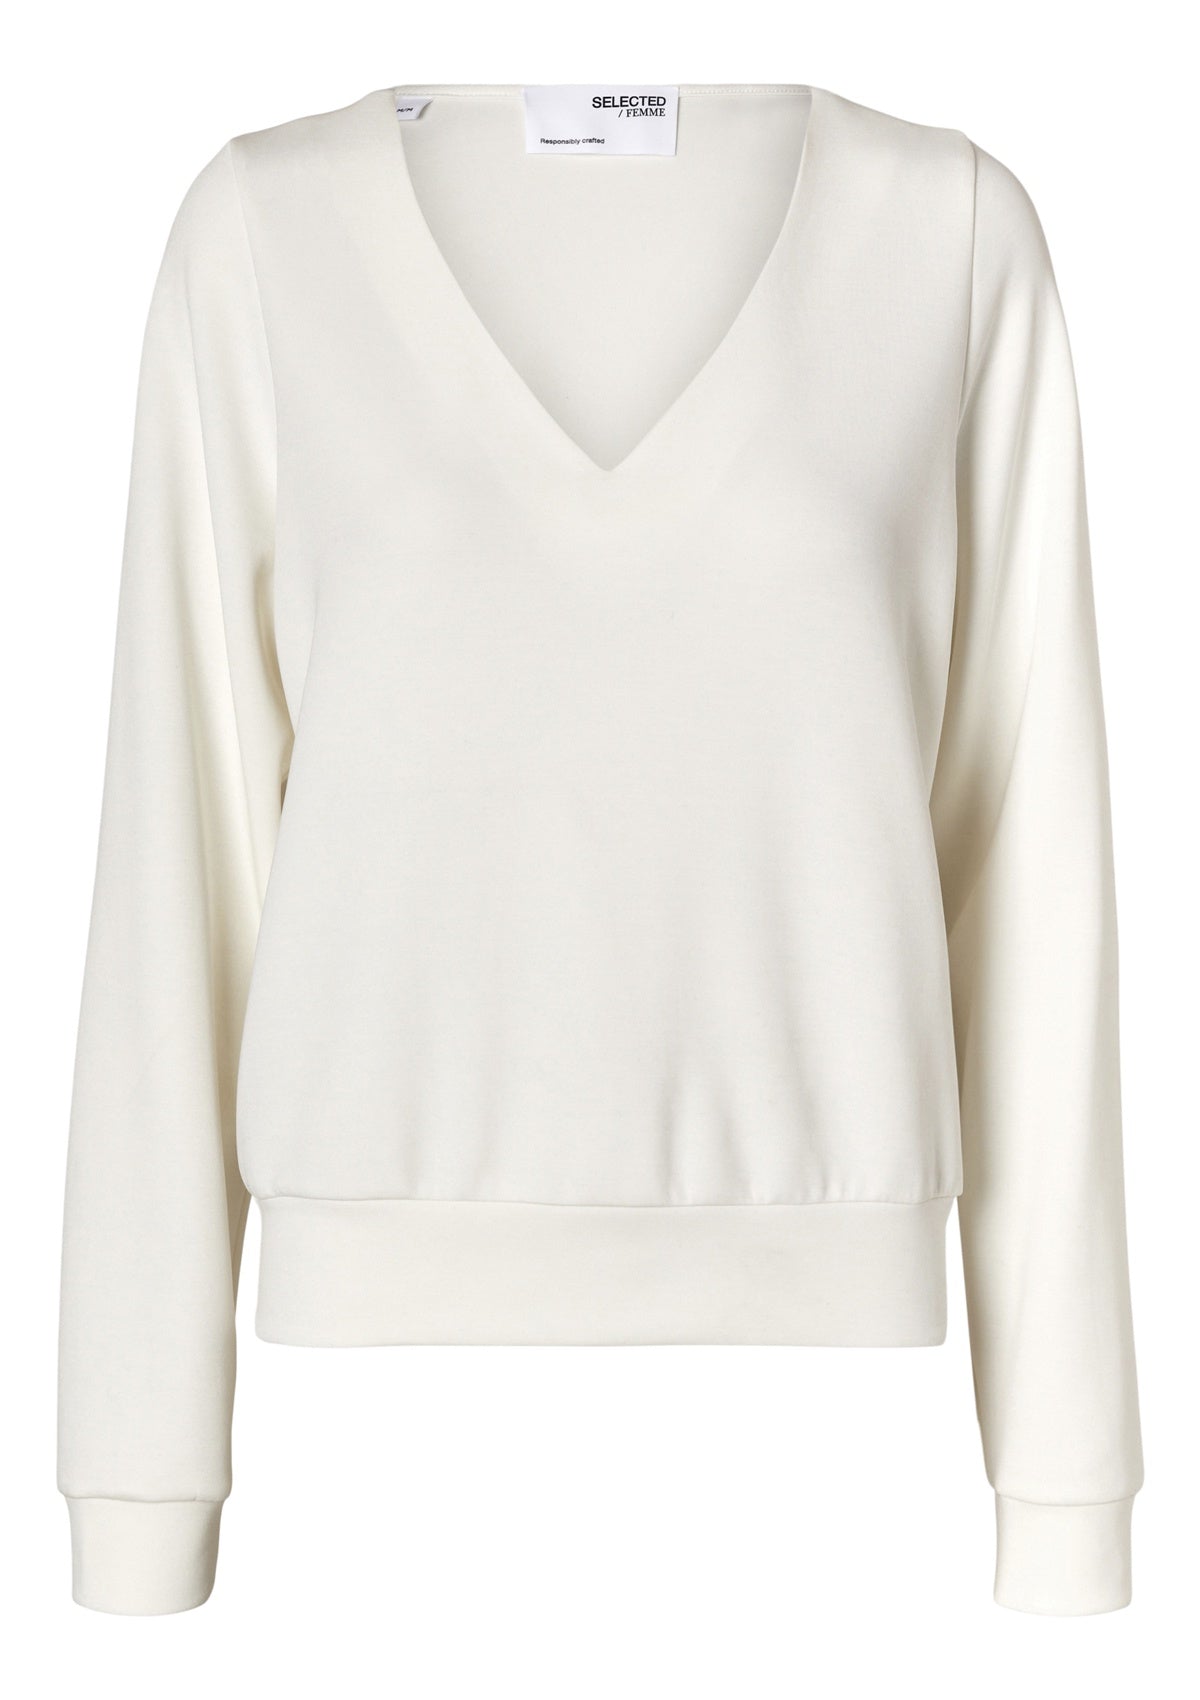 Selected Femme Tenny Sweat Top White